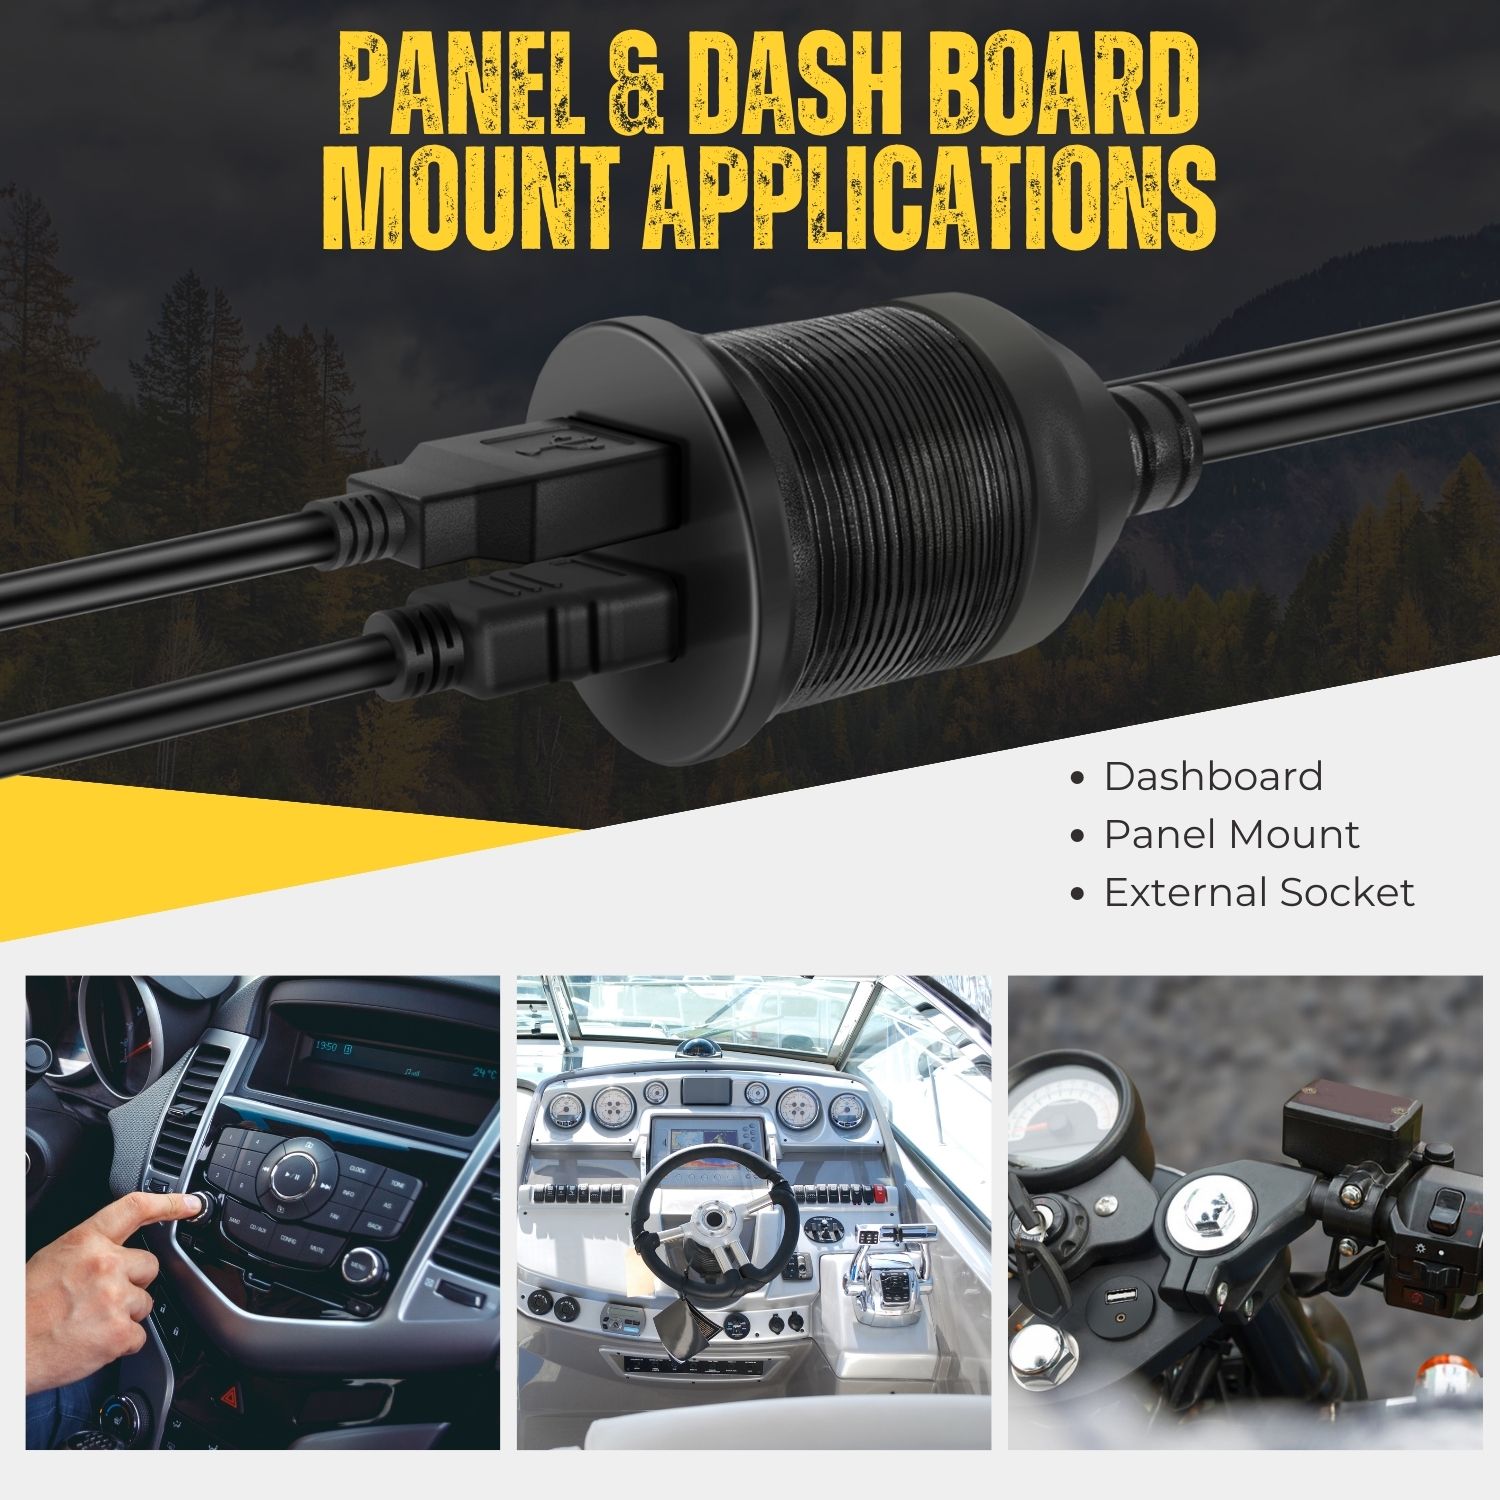 USB Port offers high data transmission and charging efficiency, and connects with HDMI compatible devices for in-car entertaining system; Compatible with any stereo system that comes with USB/HDMI input; Perfect for stereo installation on ATVs, UTVs, cars and trucks, etc.